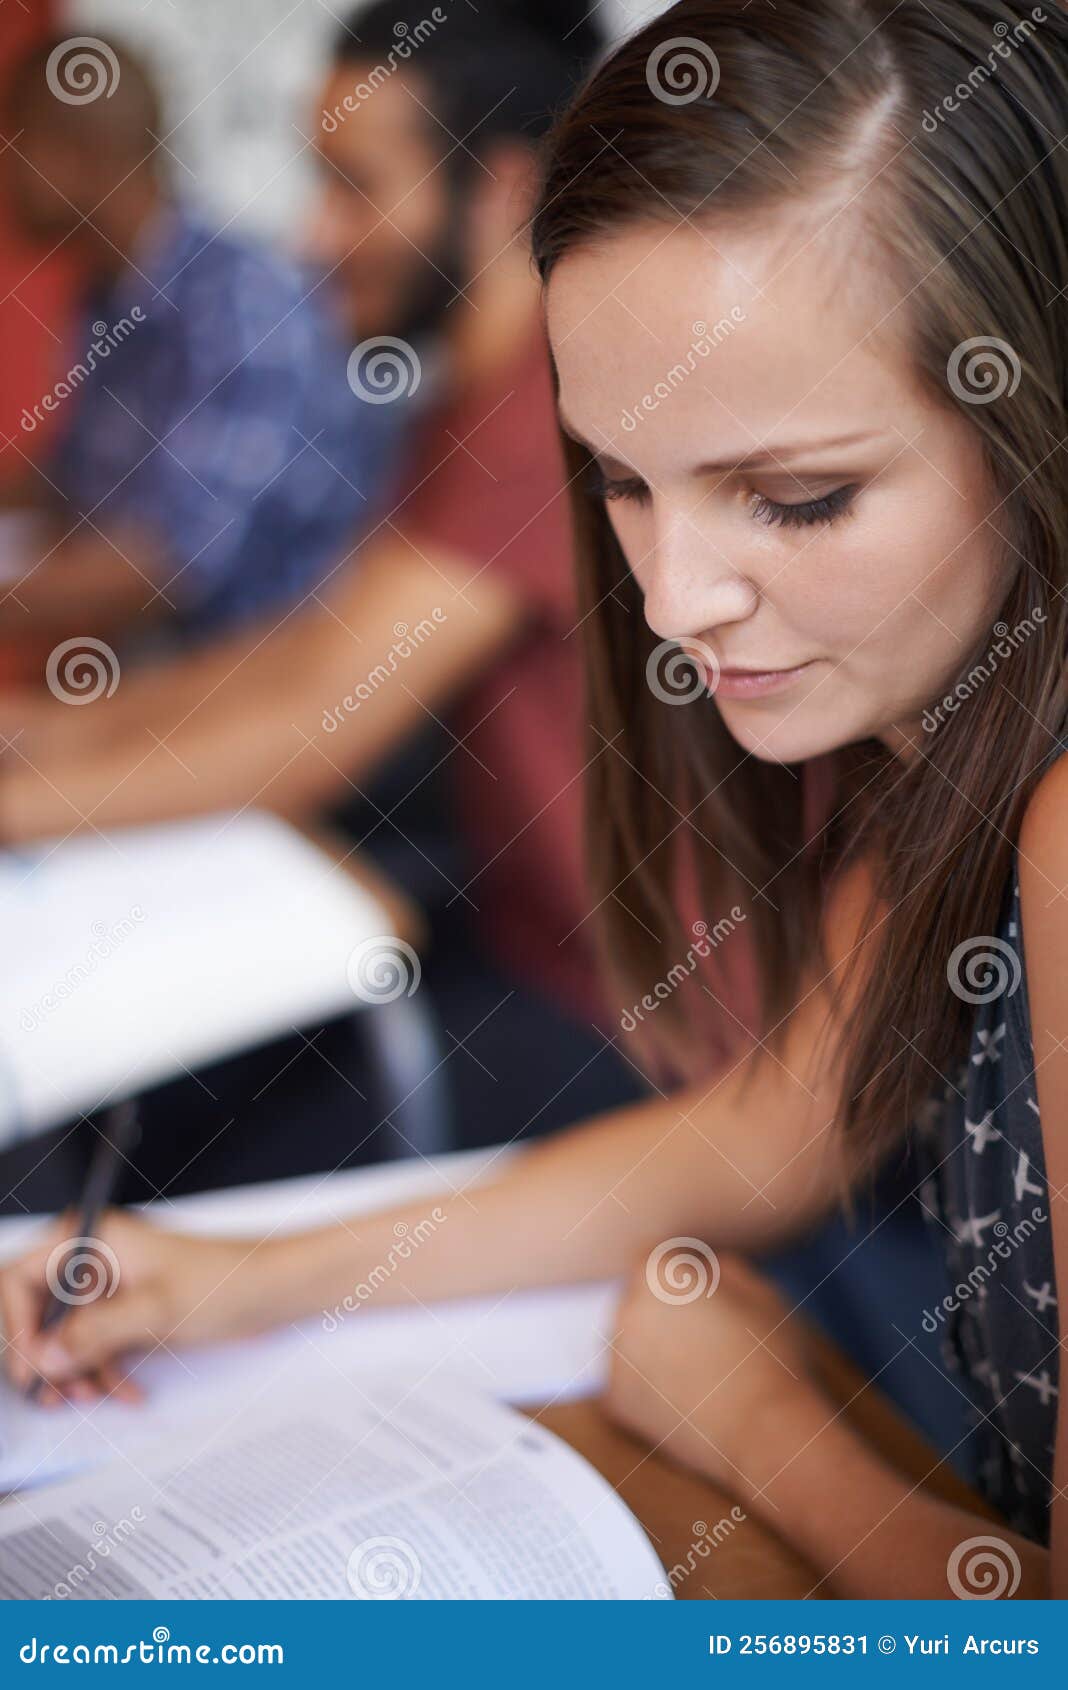 checking her resouces. an attractive young varsity student sitting in a classroom with a textbook in front of her.